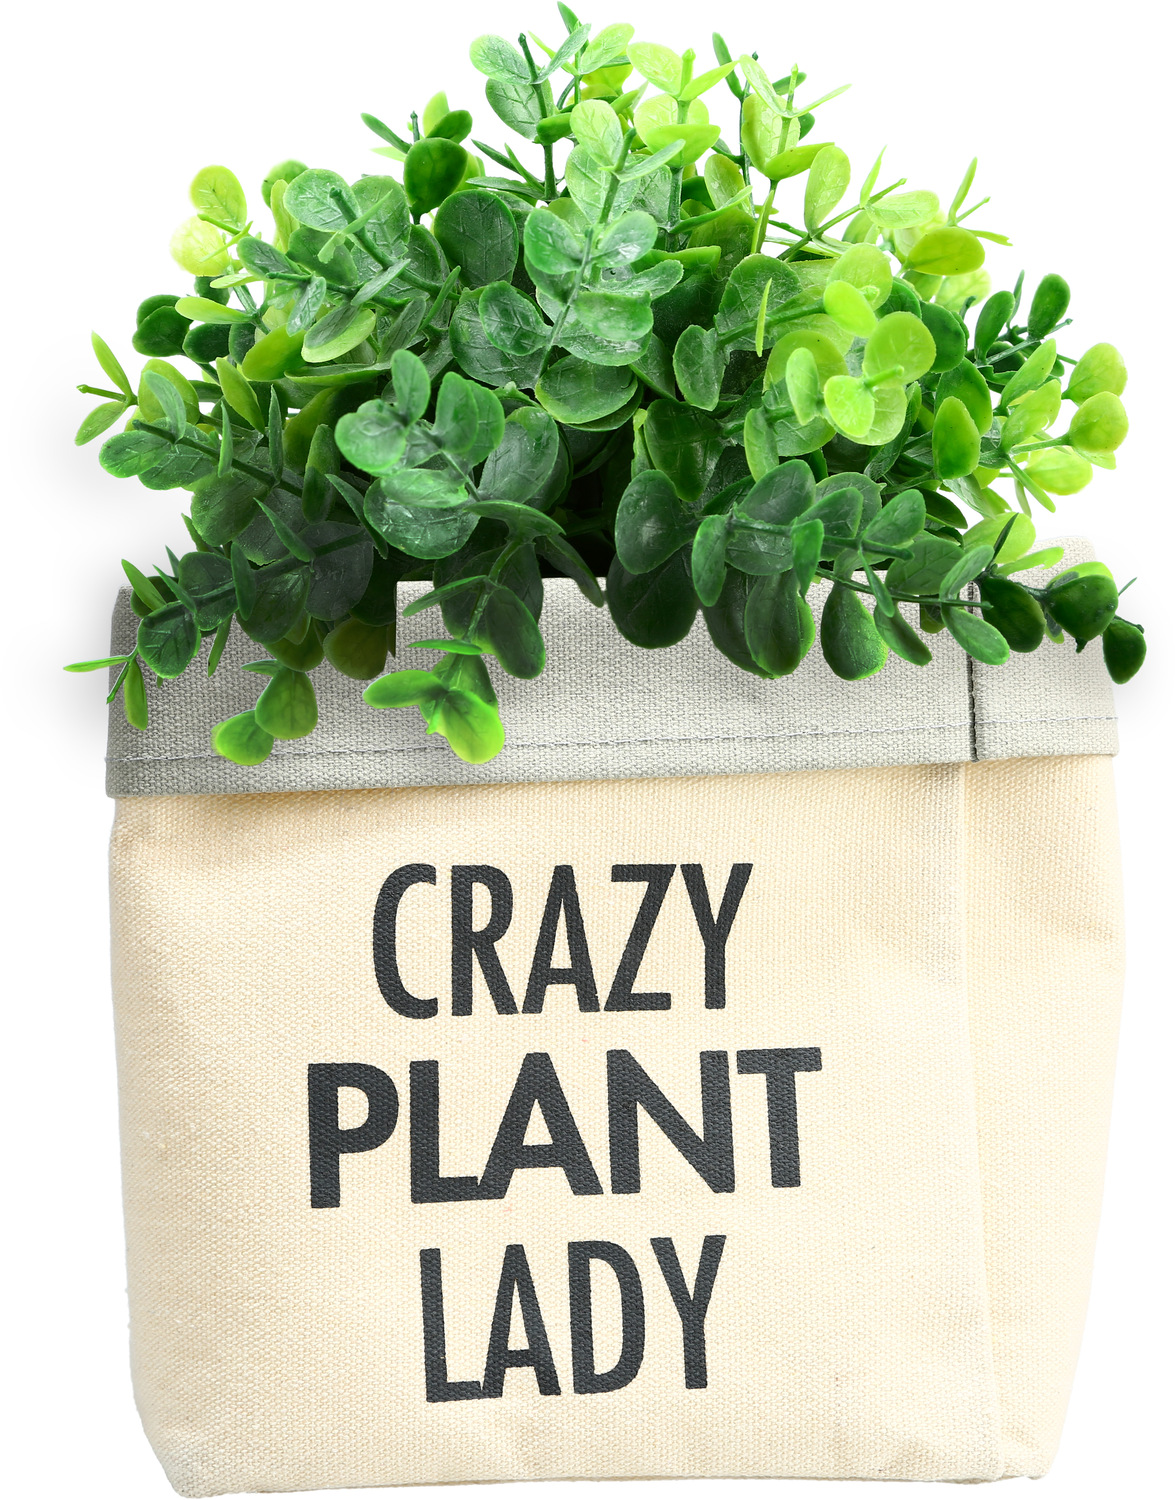 Plant Lady by Open Door Decor - Plant Lady - Canvas Planter Cover
(Holds a 6" Pot)